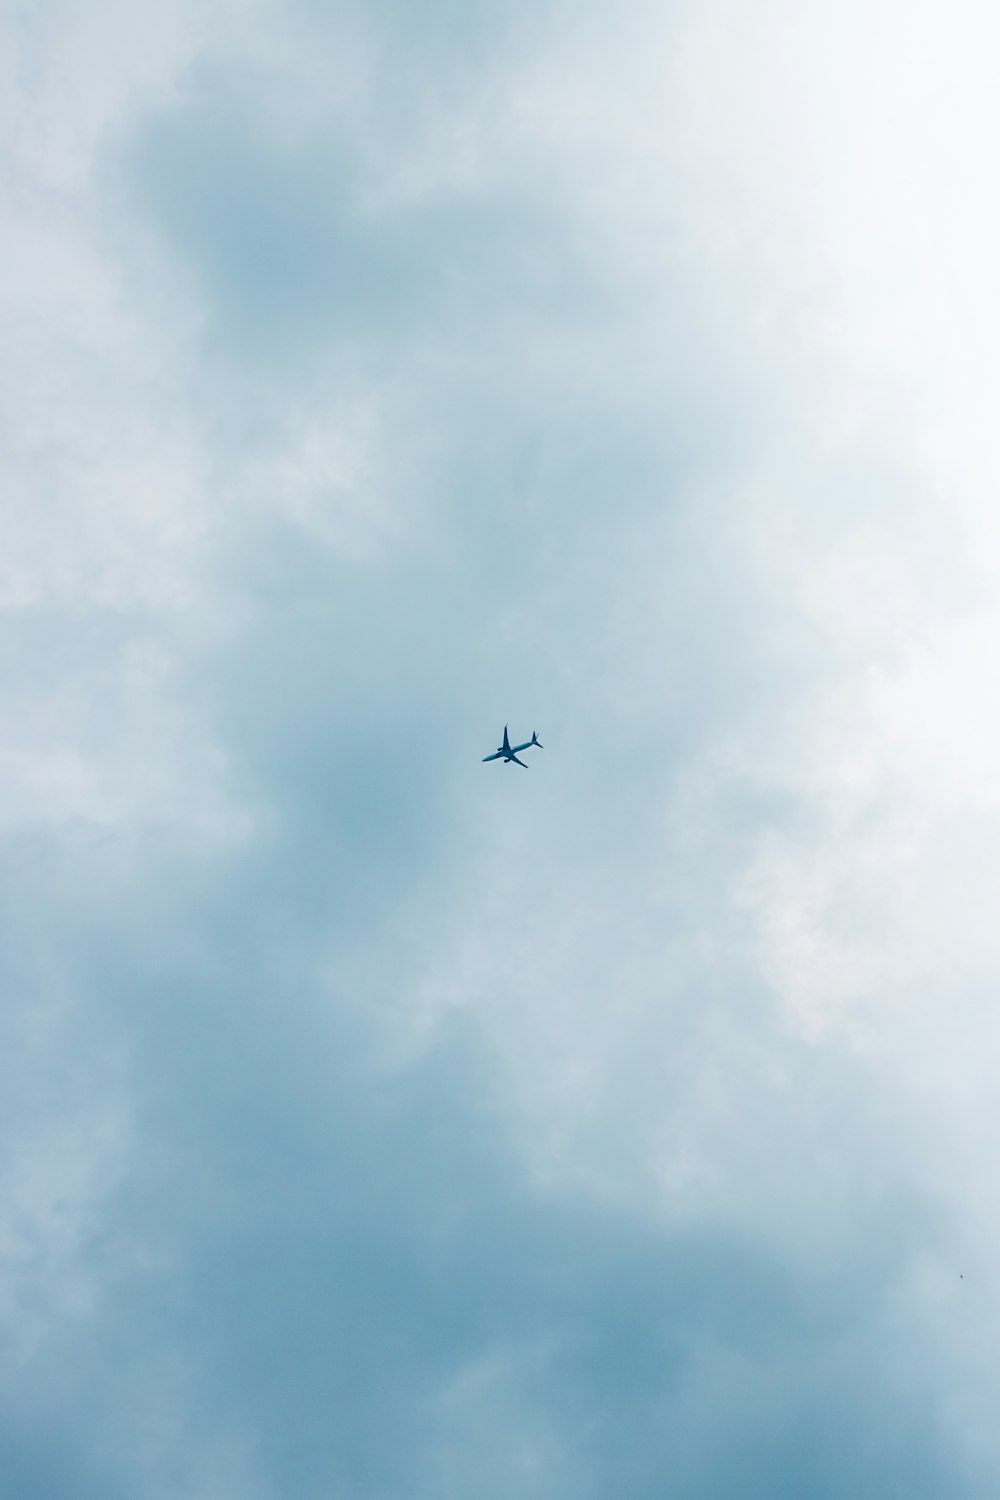 an airplane is flying in the sky on a cloudy day